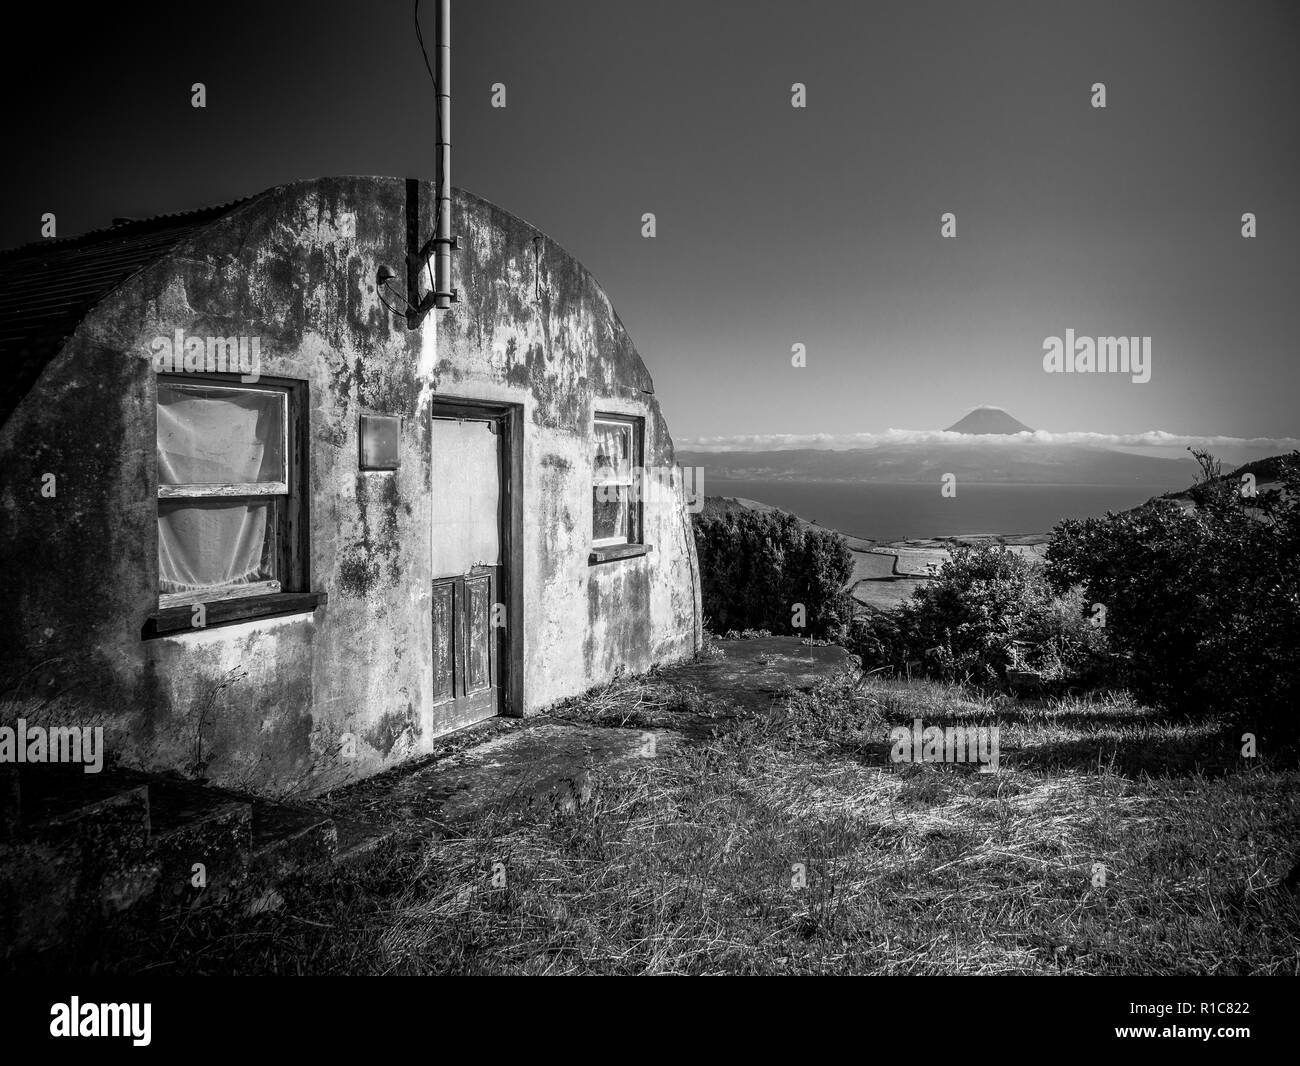 Black and white image of building in the foreground and the mountain of Pico in the background Azores Portugal Europe Stock Photo